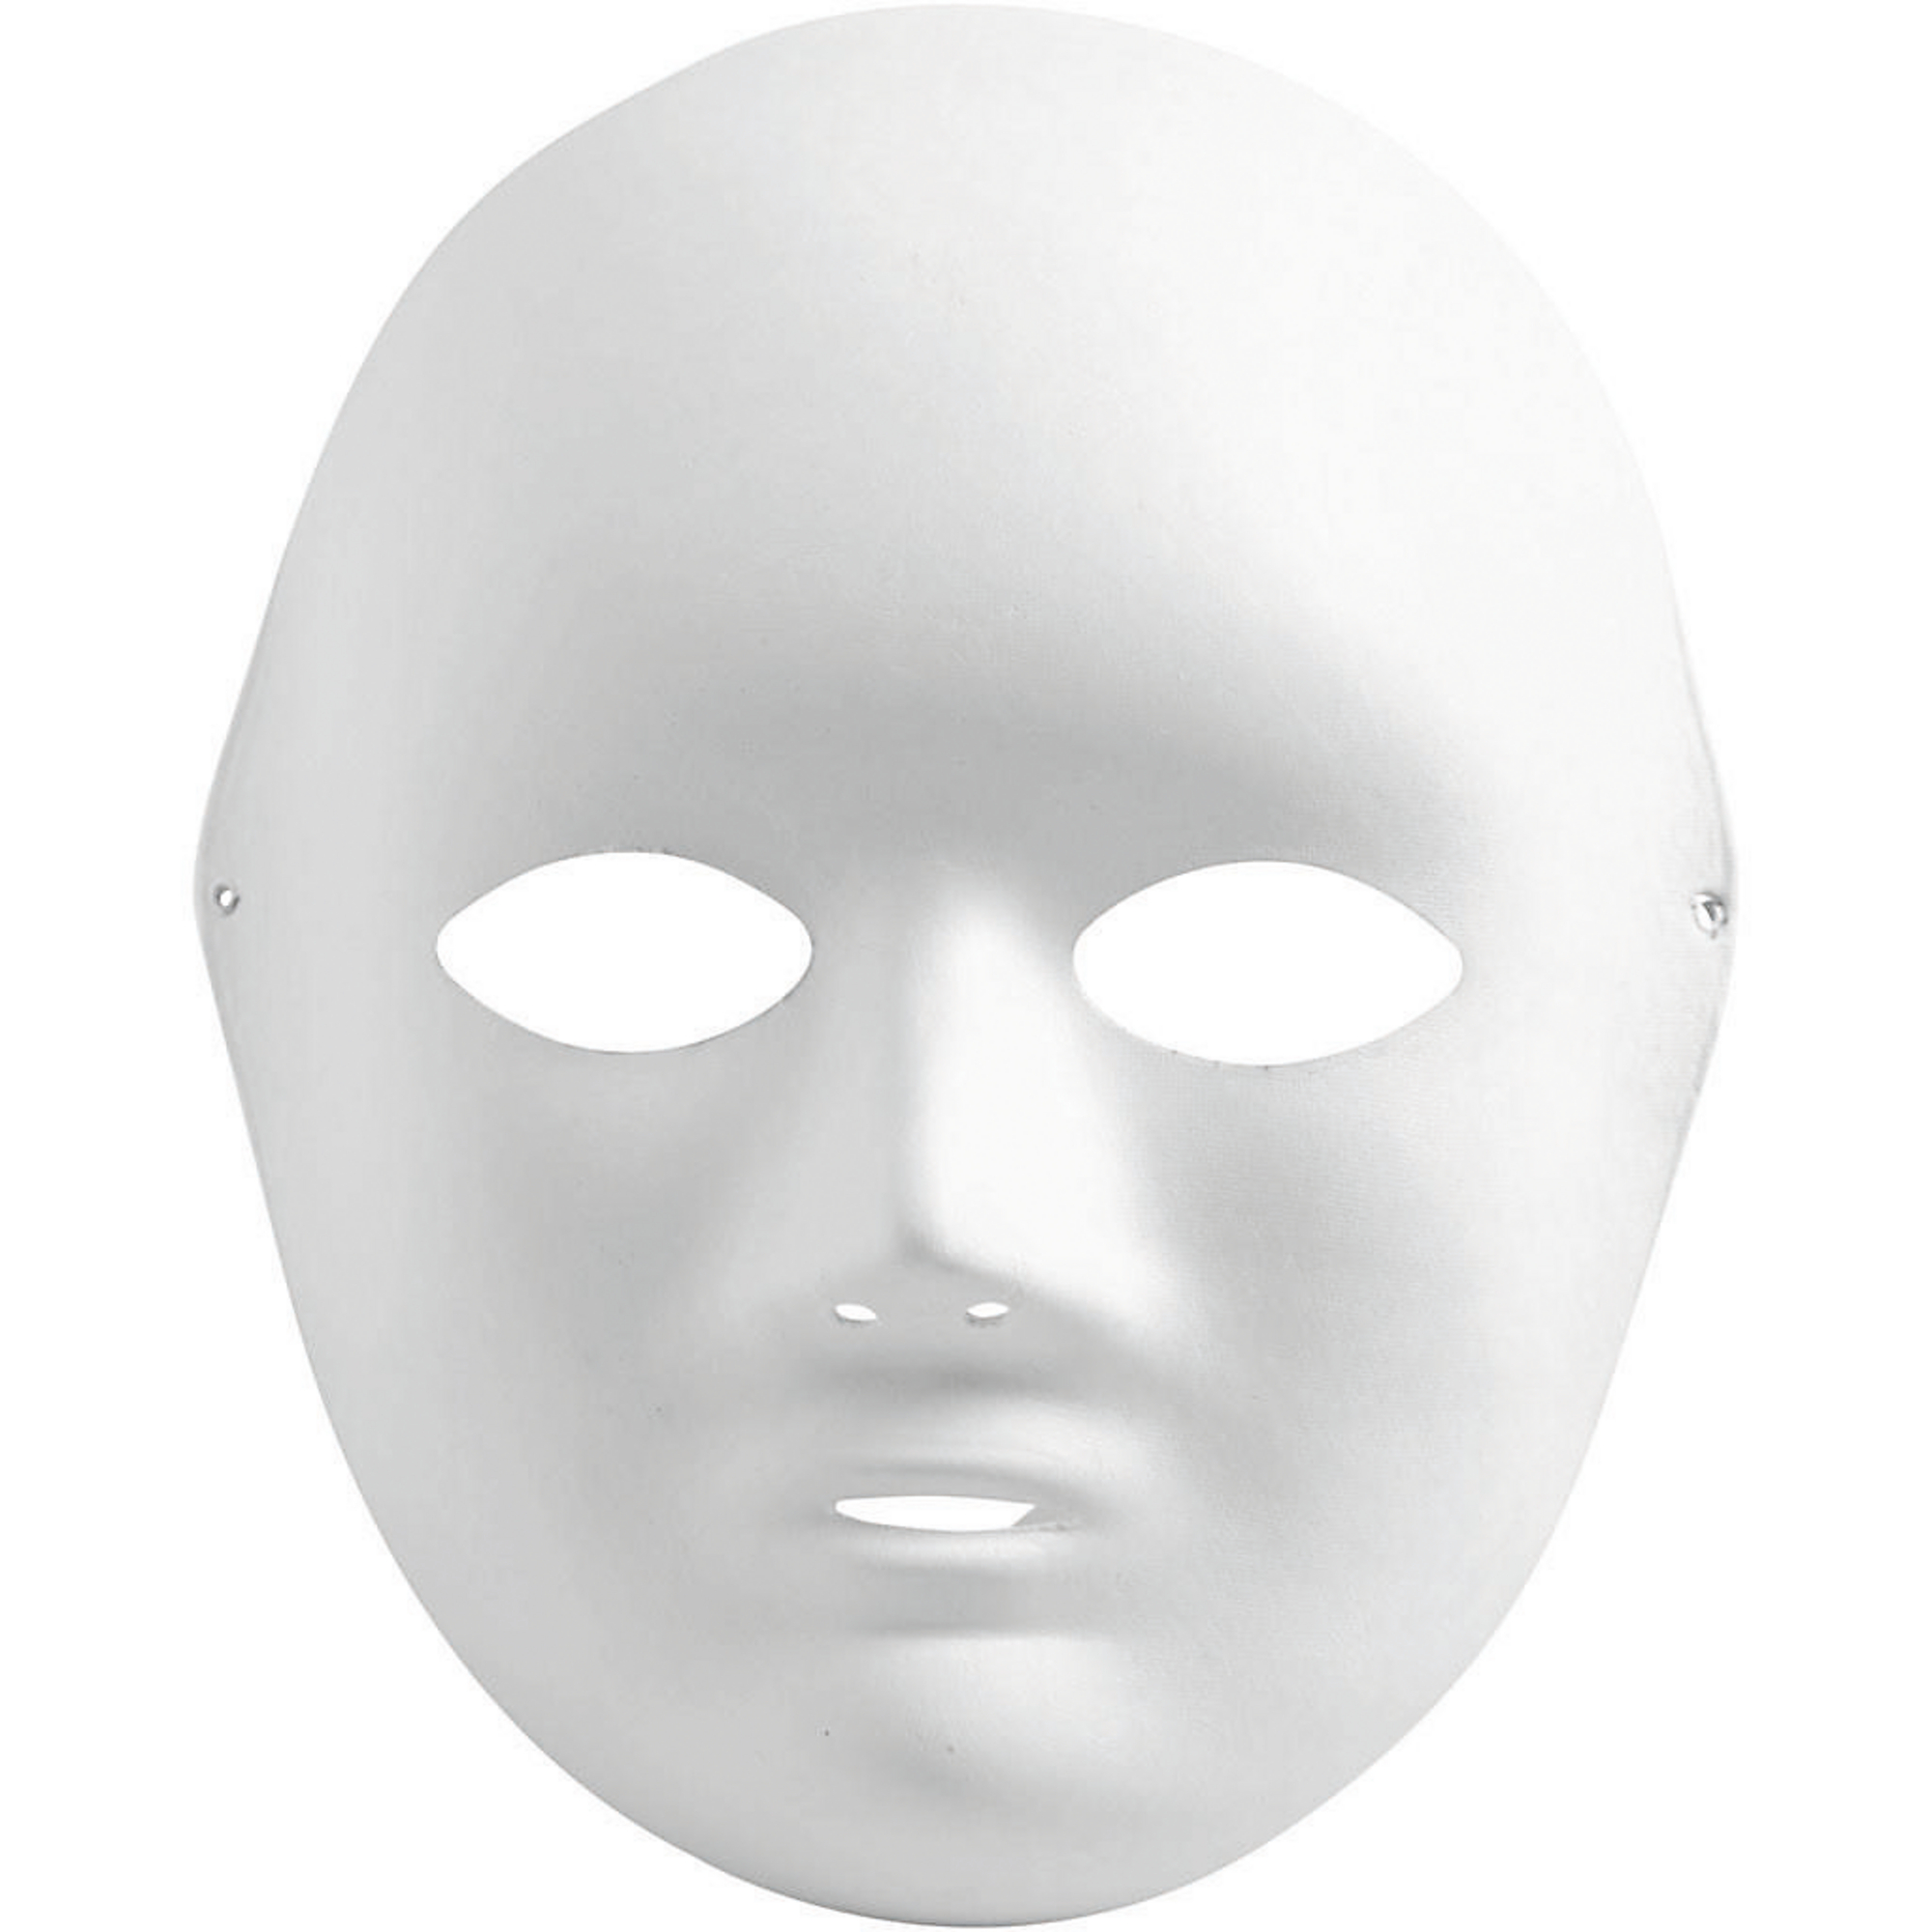 white paper mask Cheaper Than Retail Price> Buy Clothing, Accessories ...